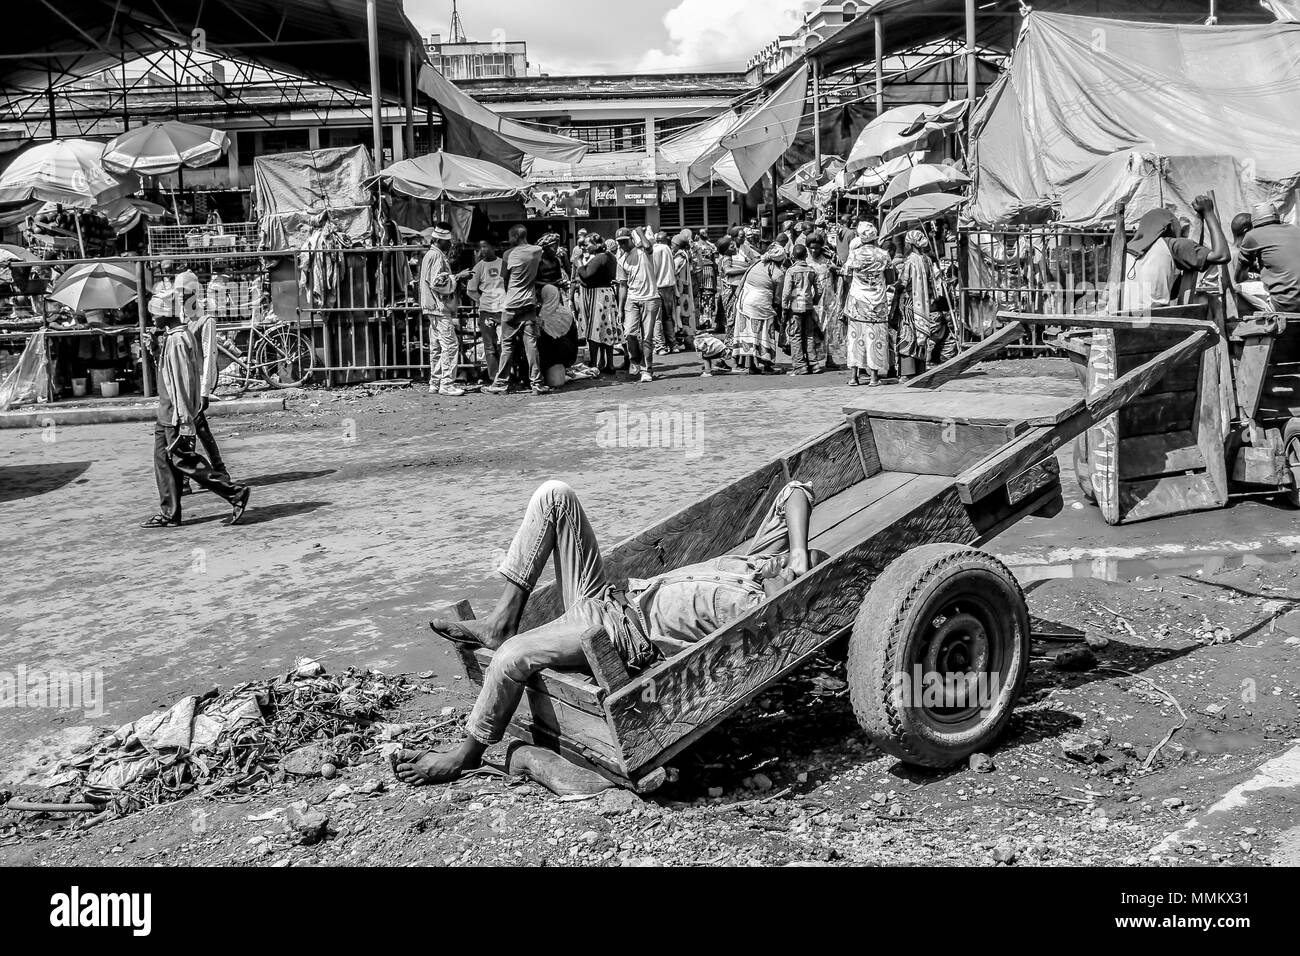 Arusha, Tanzania, Africa - January 2, 2013: Man lying on a wooden cart sleeps at the market in town Stock Photo